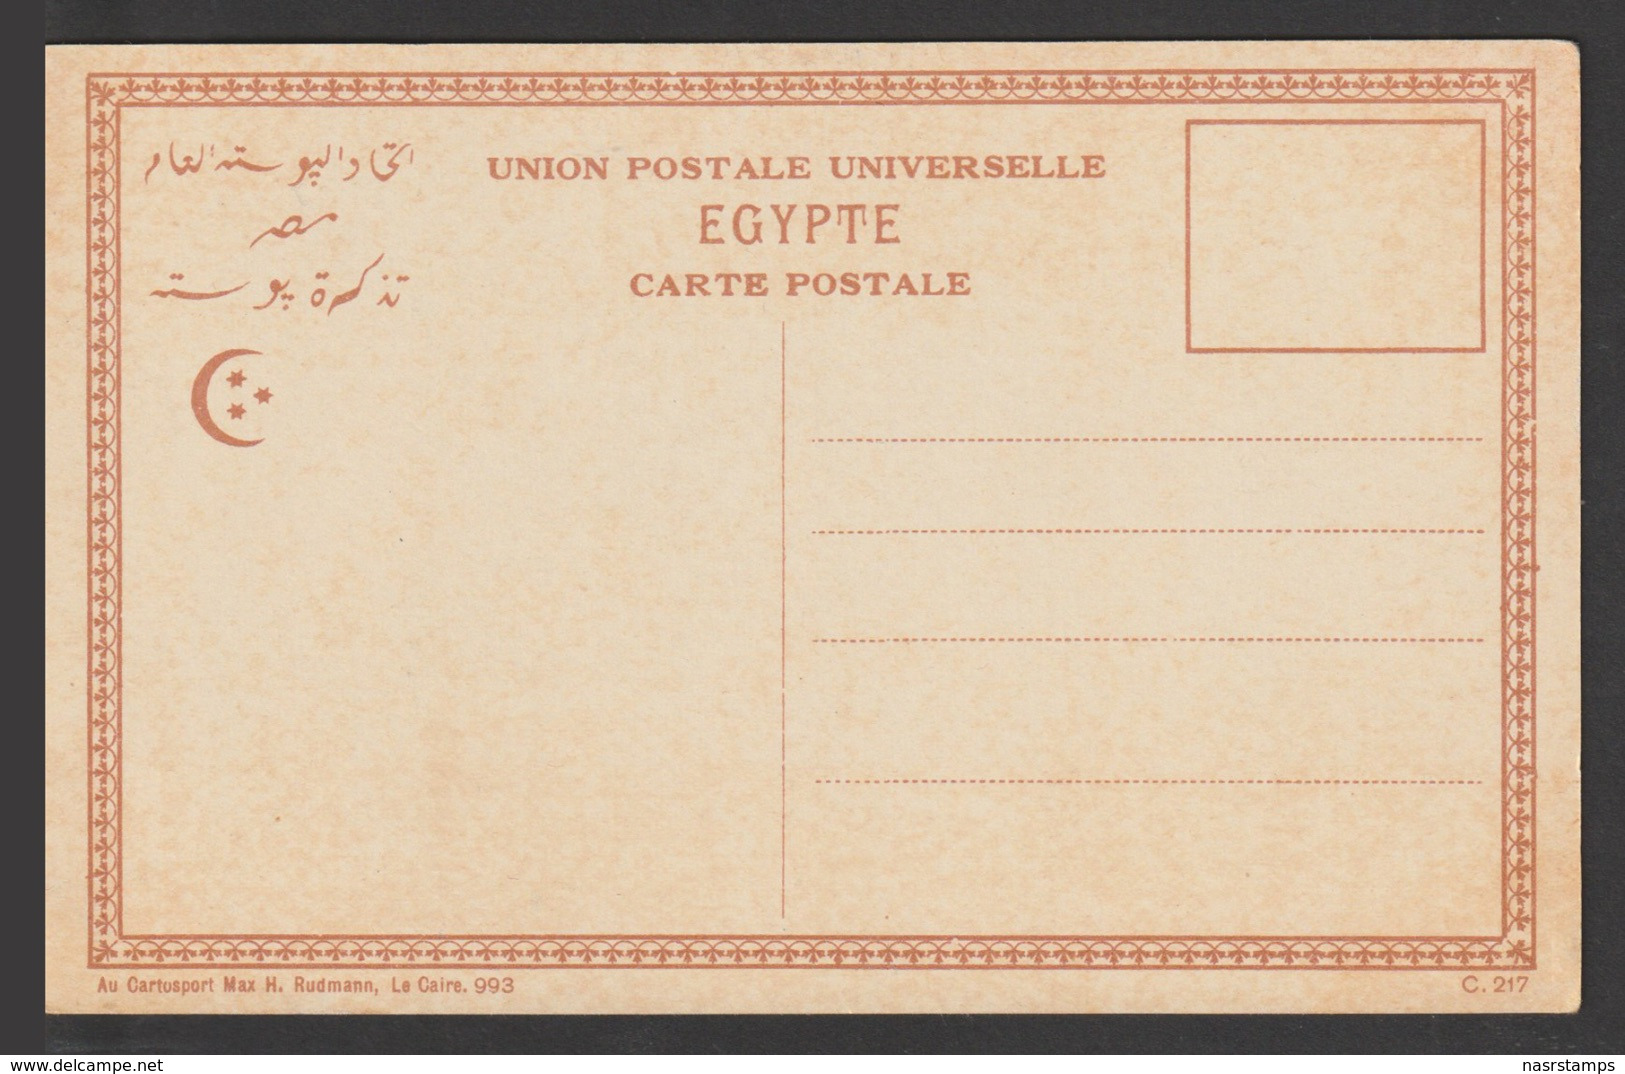 Egypt - Very Rare - Vintage Post Card - View Of The Jardin D'embassy Of France - 1866-1914 Khedivate Of Egypt